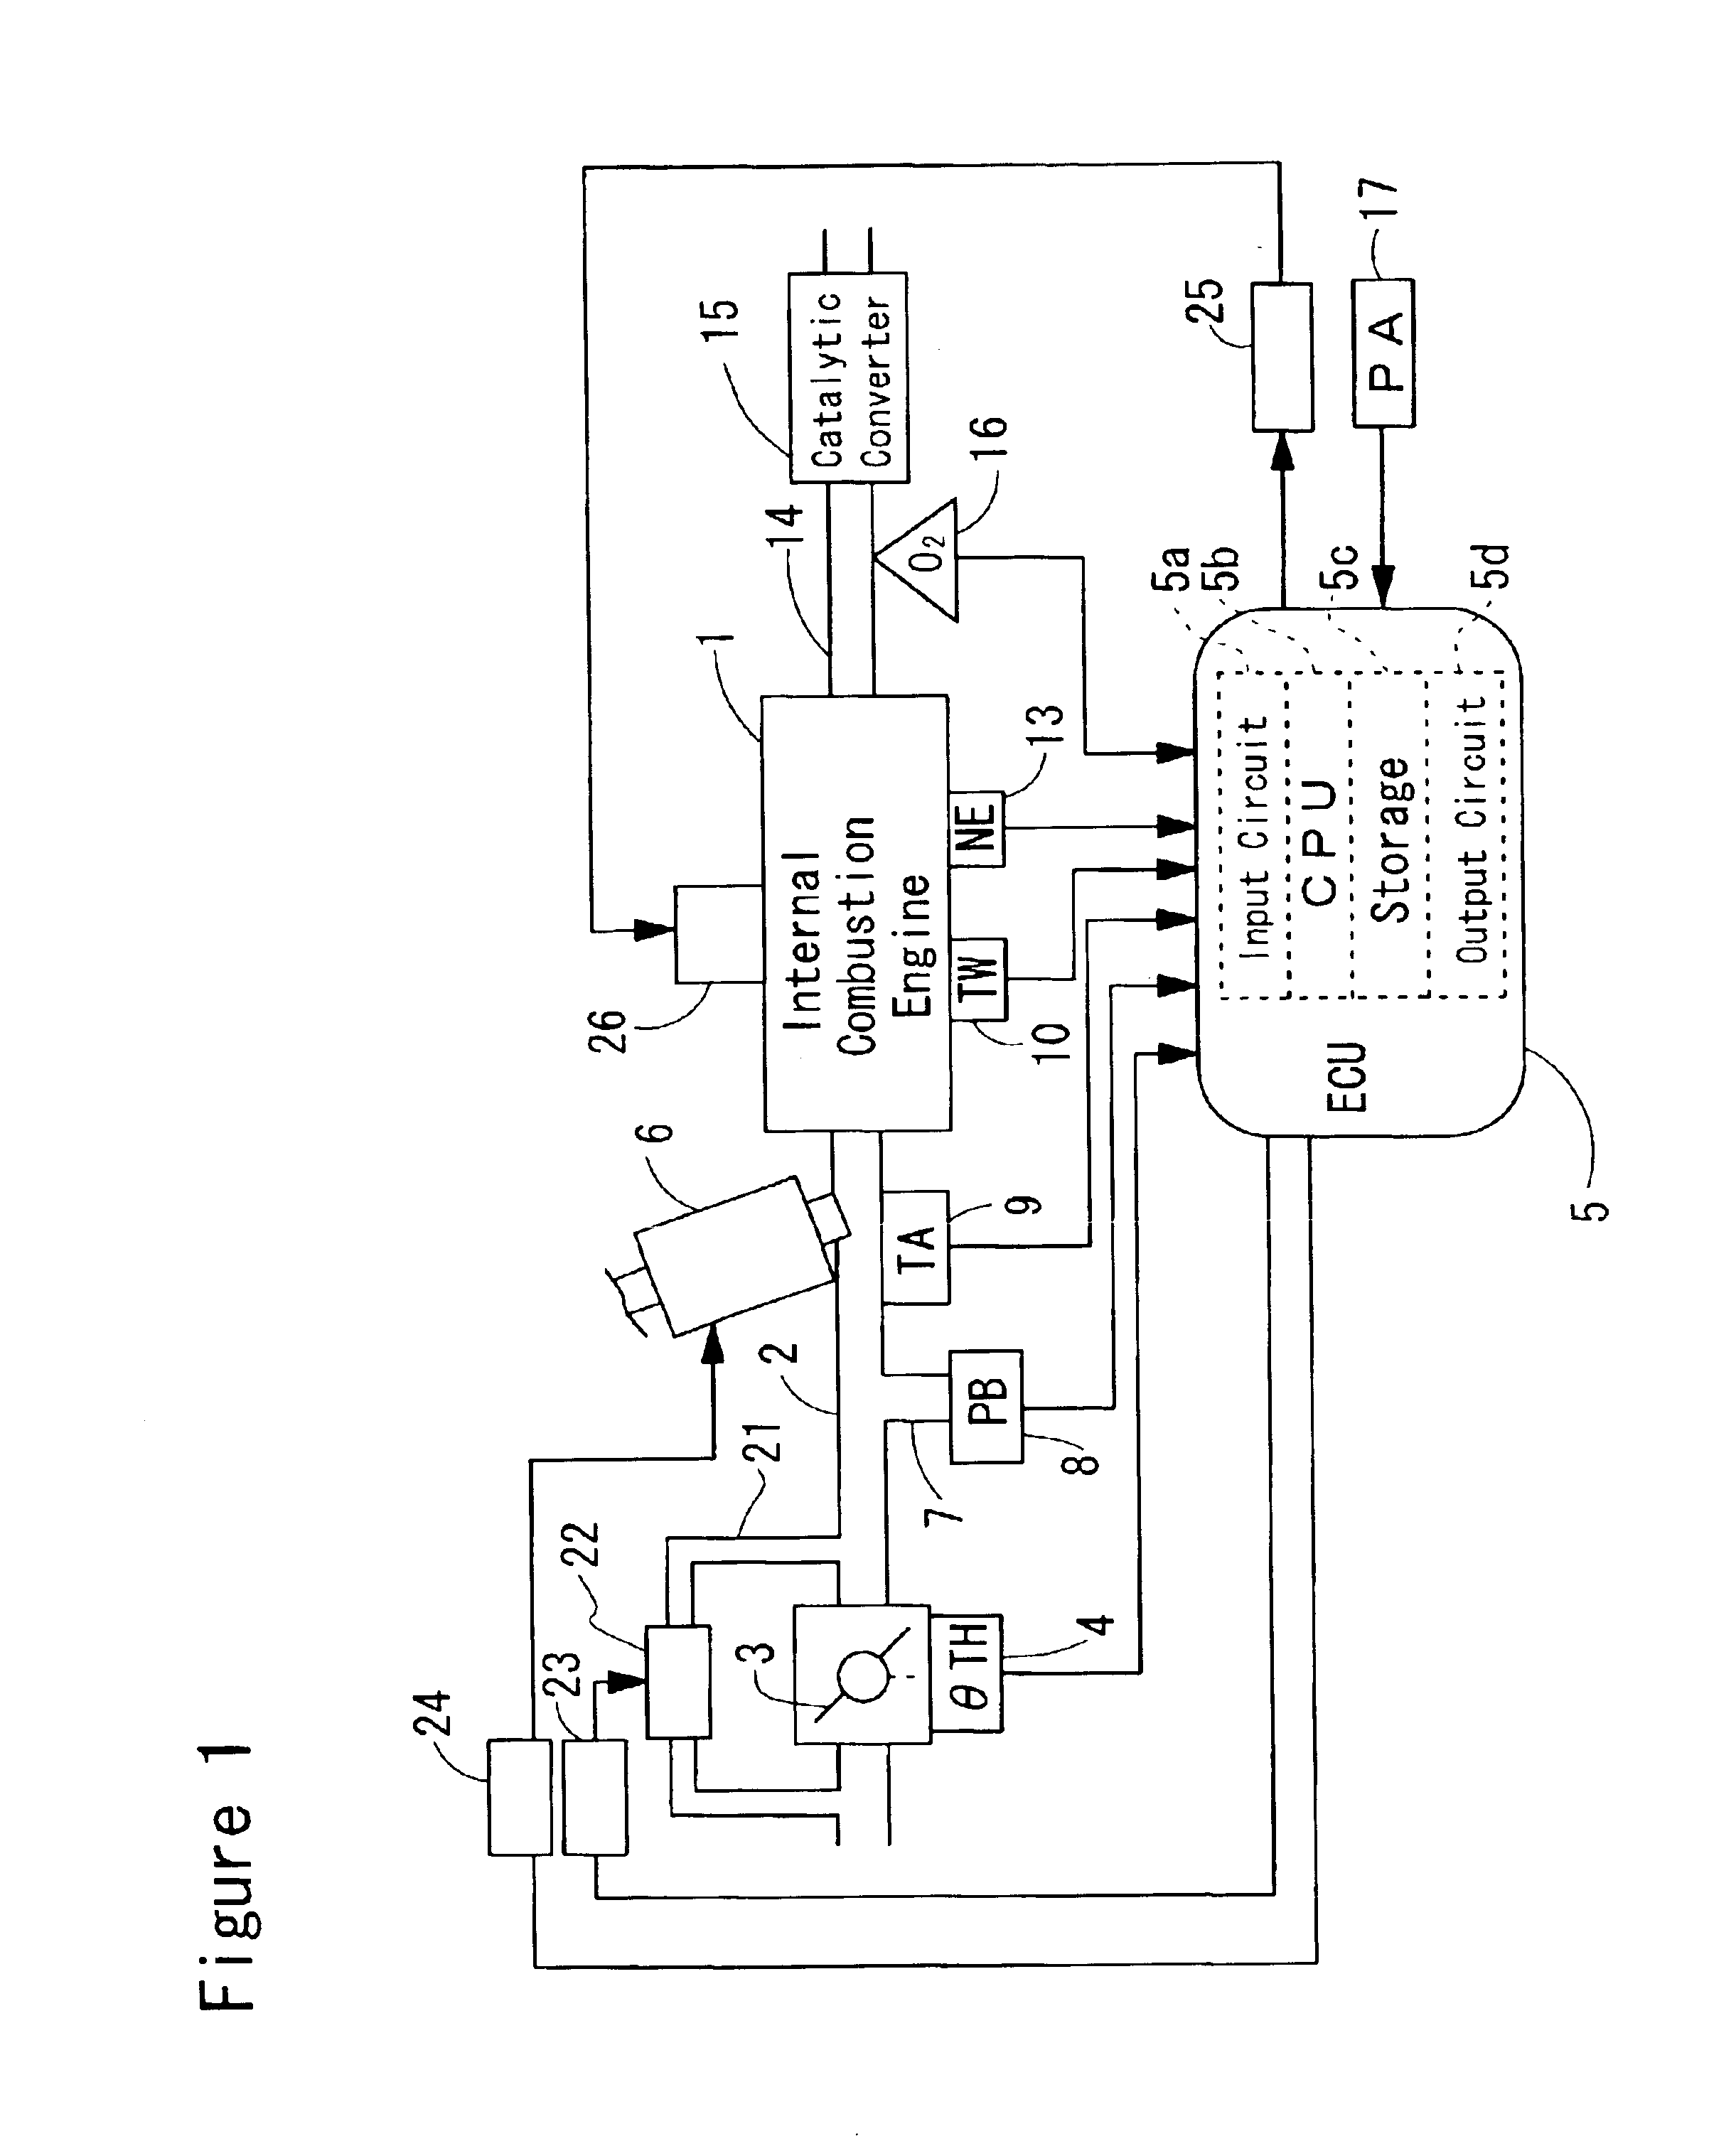 Plant controller for frequency-shaping response-designating control having a filtering function